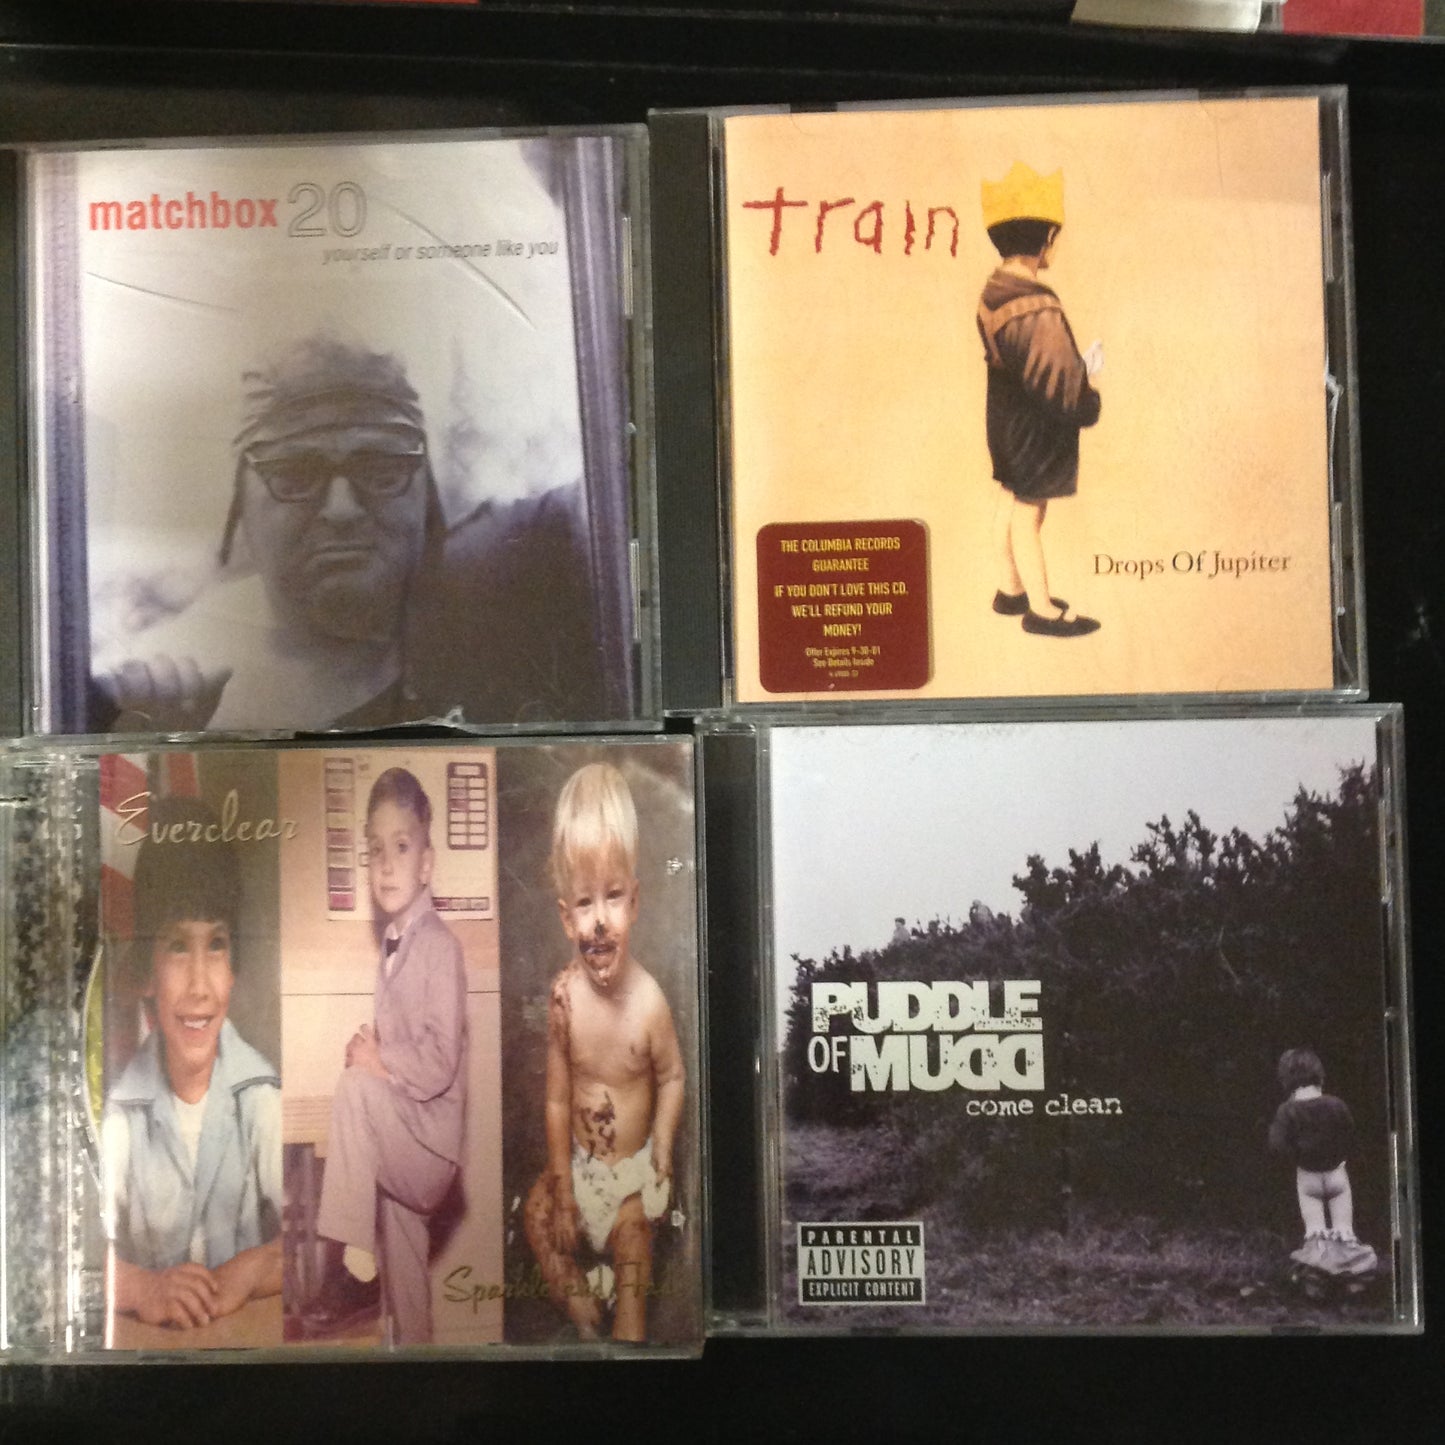 4 Disc SET BARGAIN CDs Train Drops of Jupiter Puddle Of Mudd Come Clean Matchbox 20 Yourself or Someone Like You Everclear Sparkle and Fade 2000's 90's Rock Alternative Catchy Radio Singles